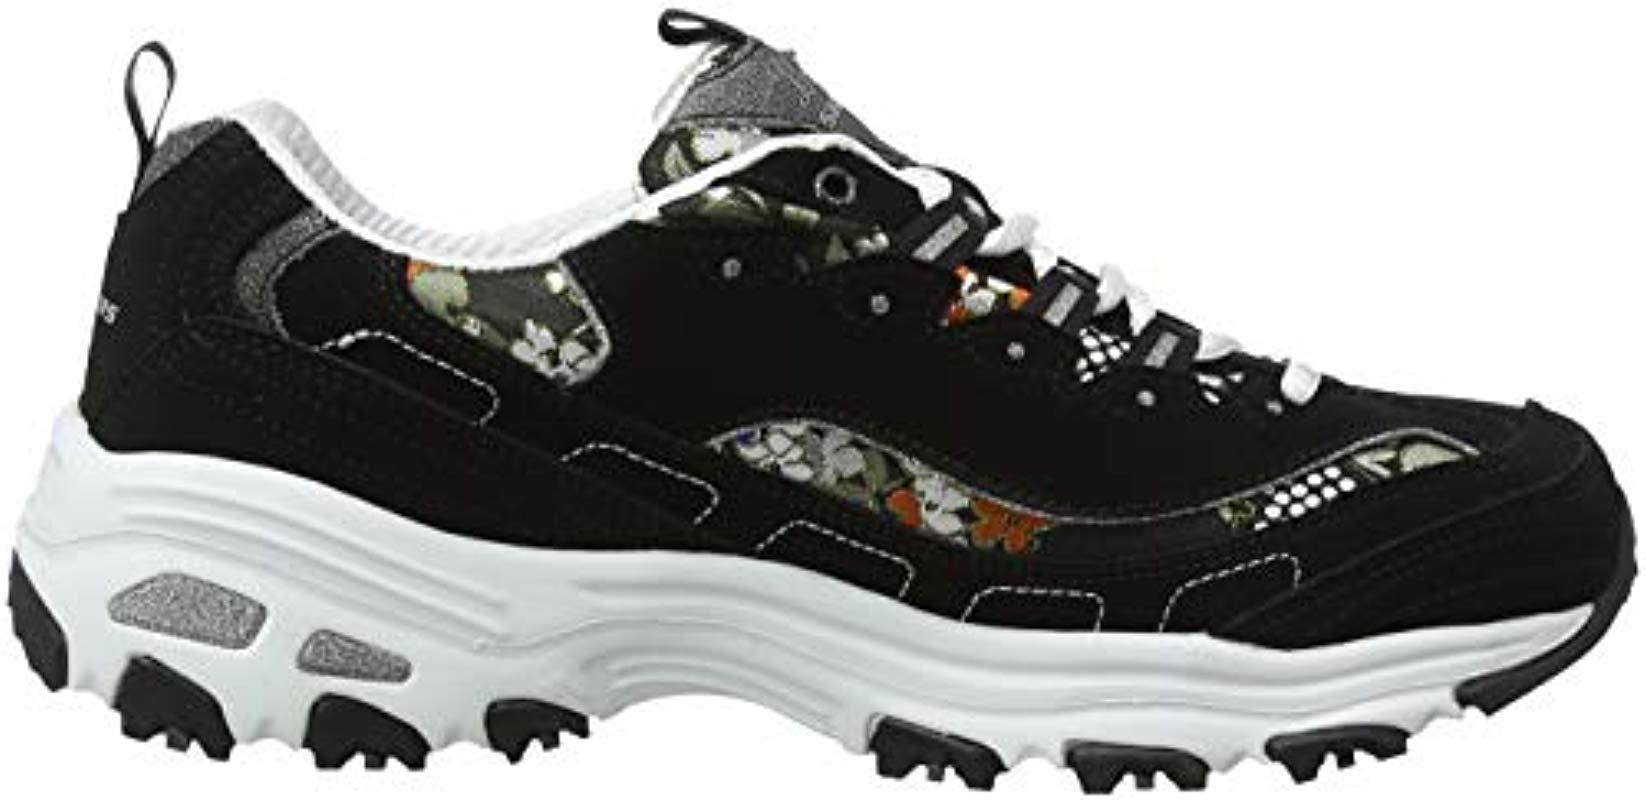 Skechers D'lites-floral Days Trainers in Black/White (Black) - Save 35% |  Lyst